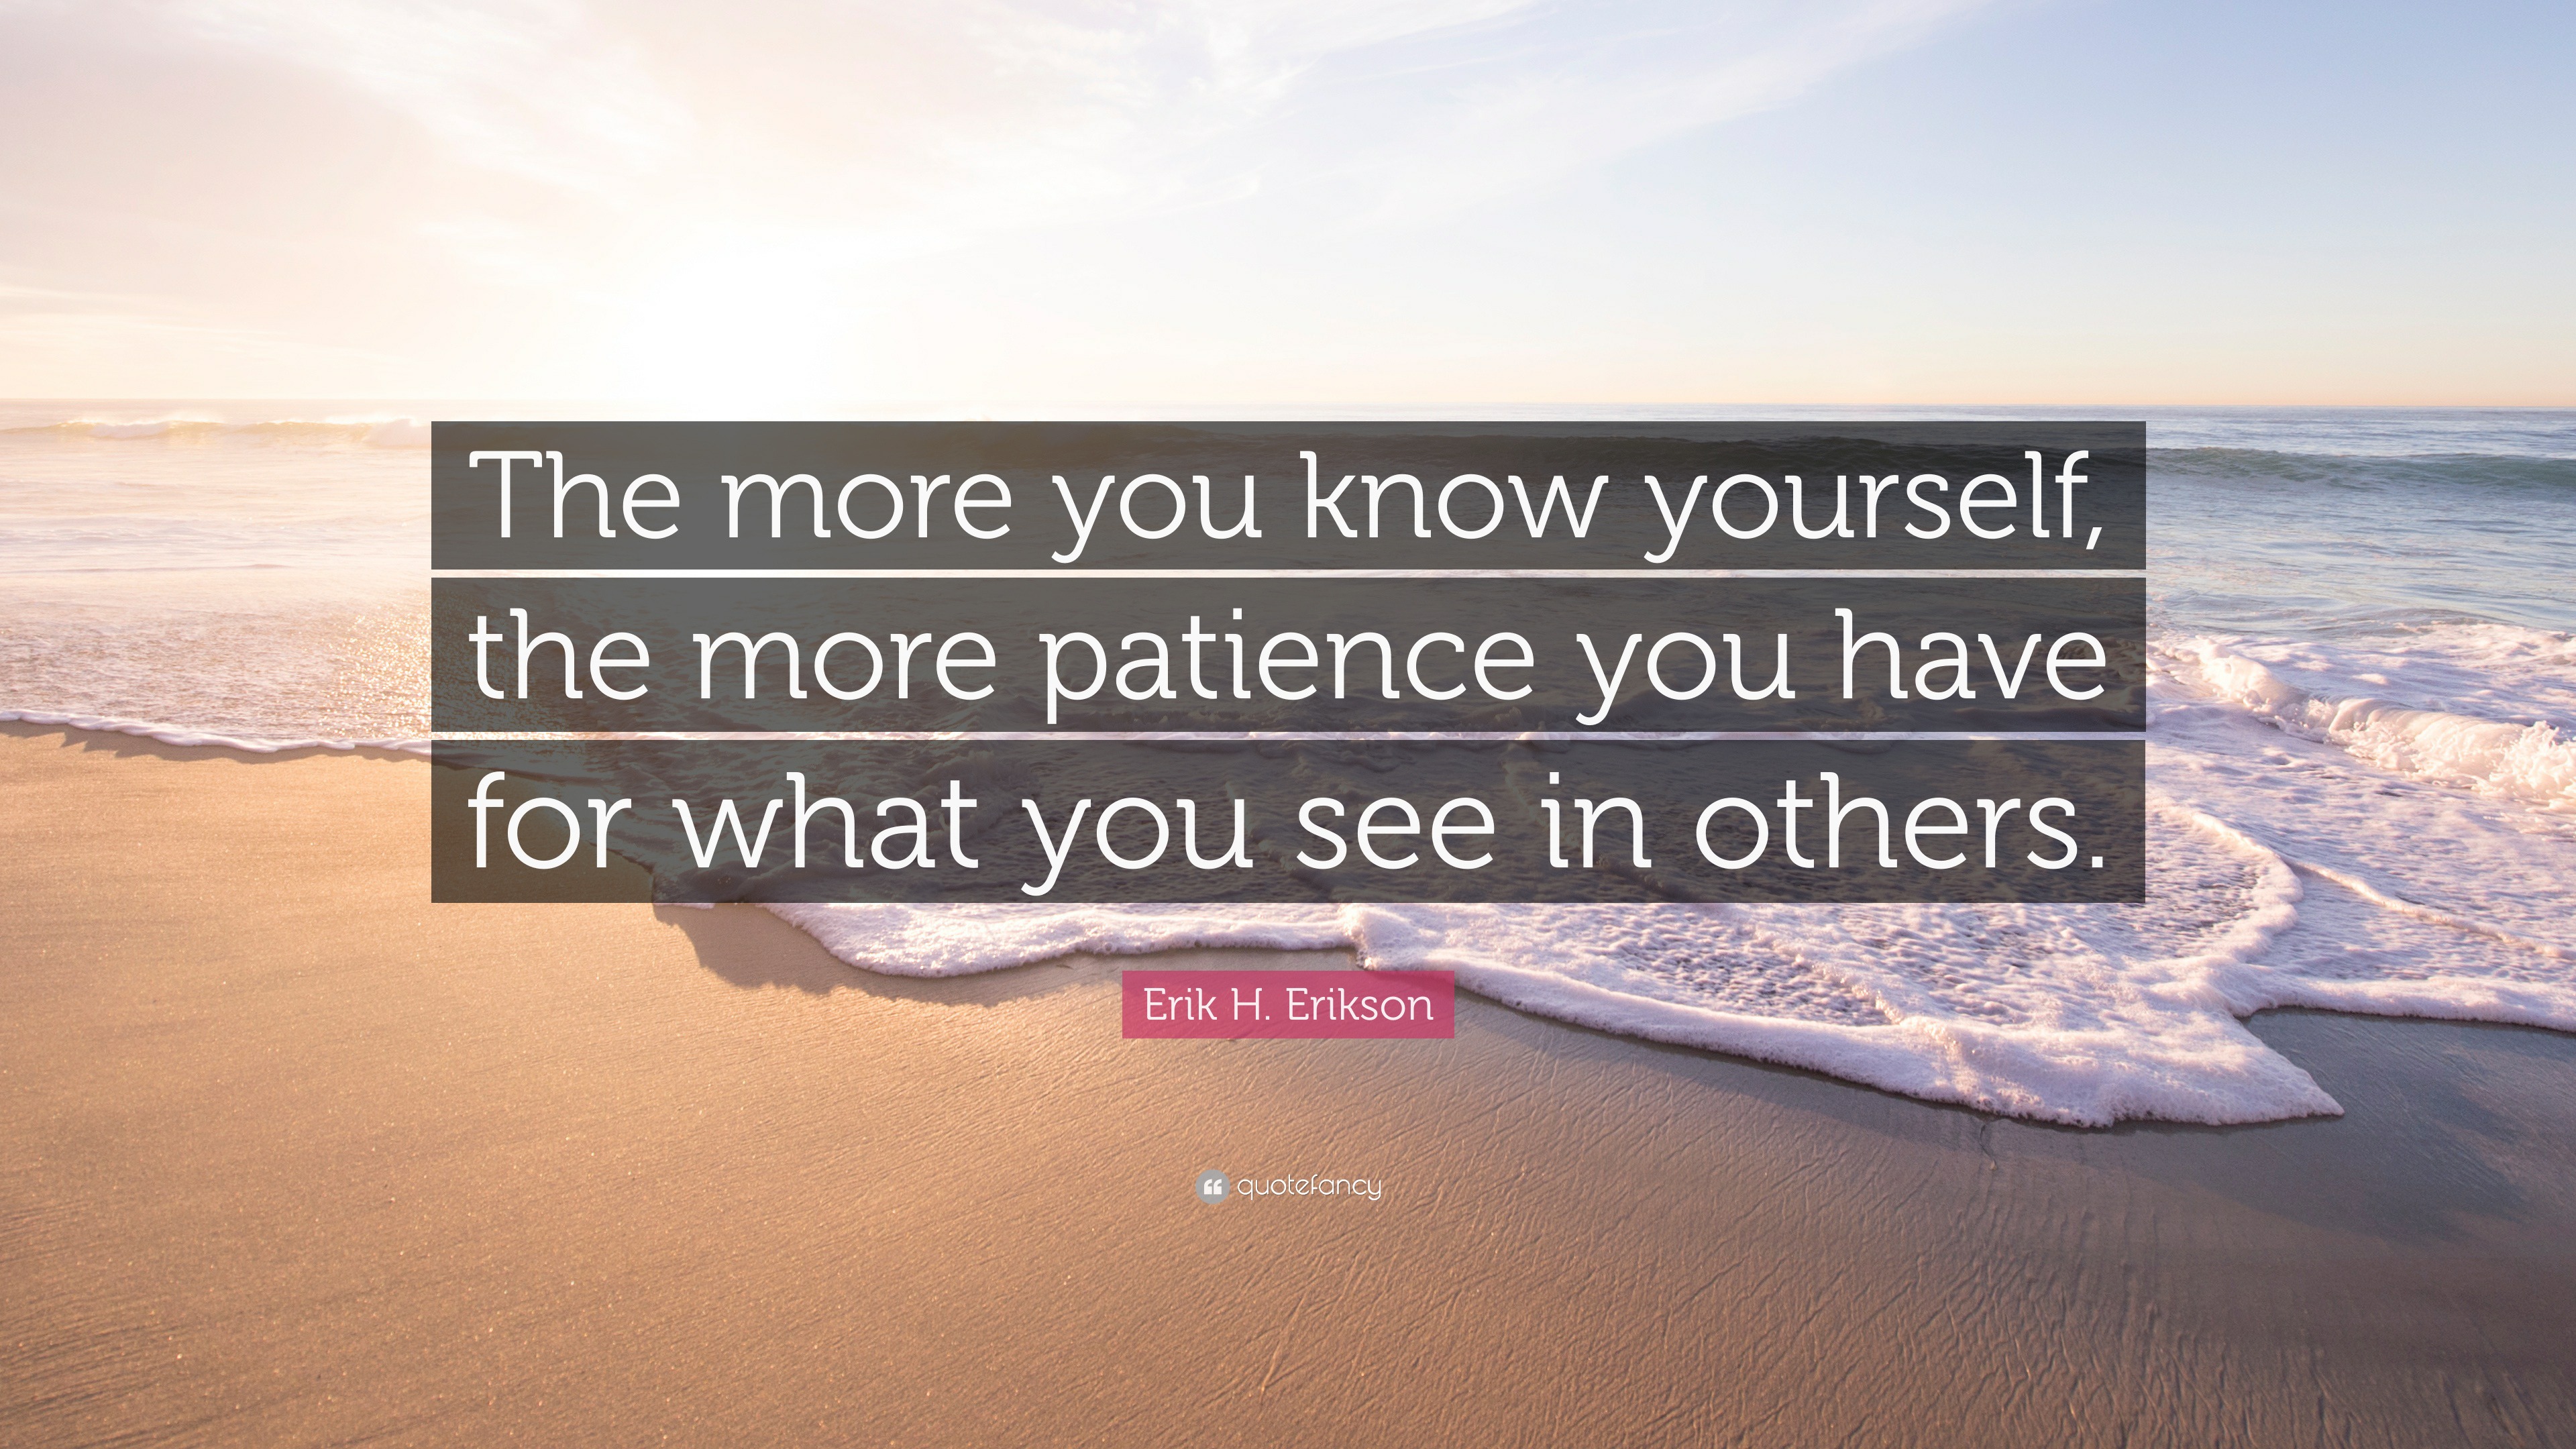 Erik H. Erikson Quote: “The more you know yourself, the more patience ...